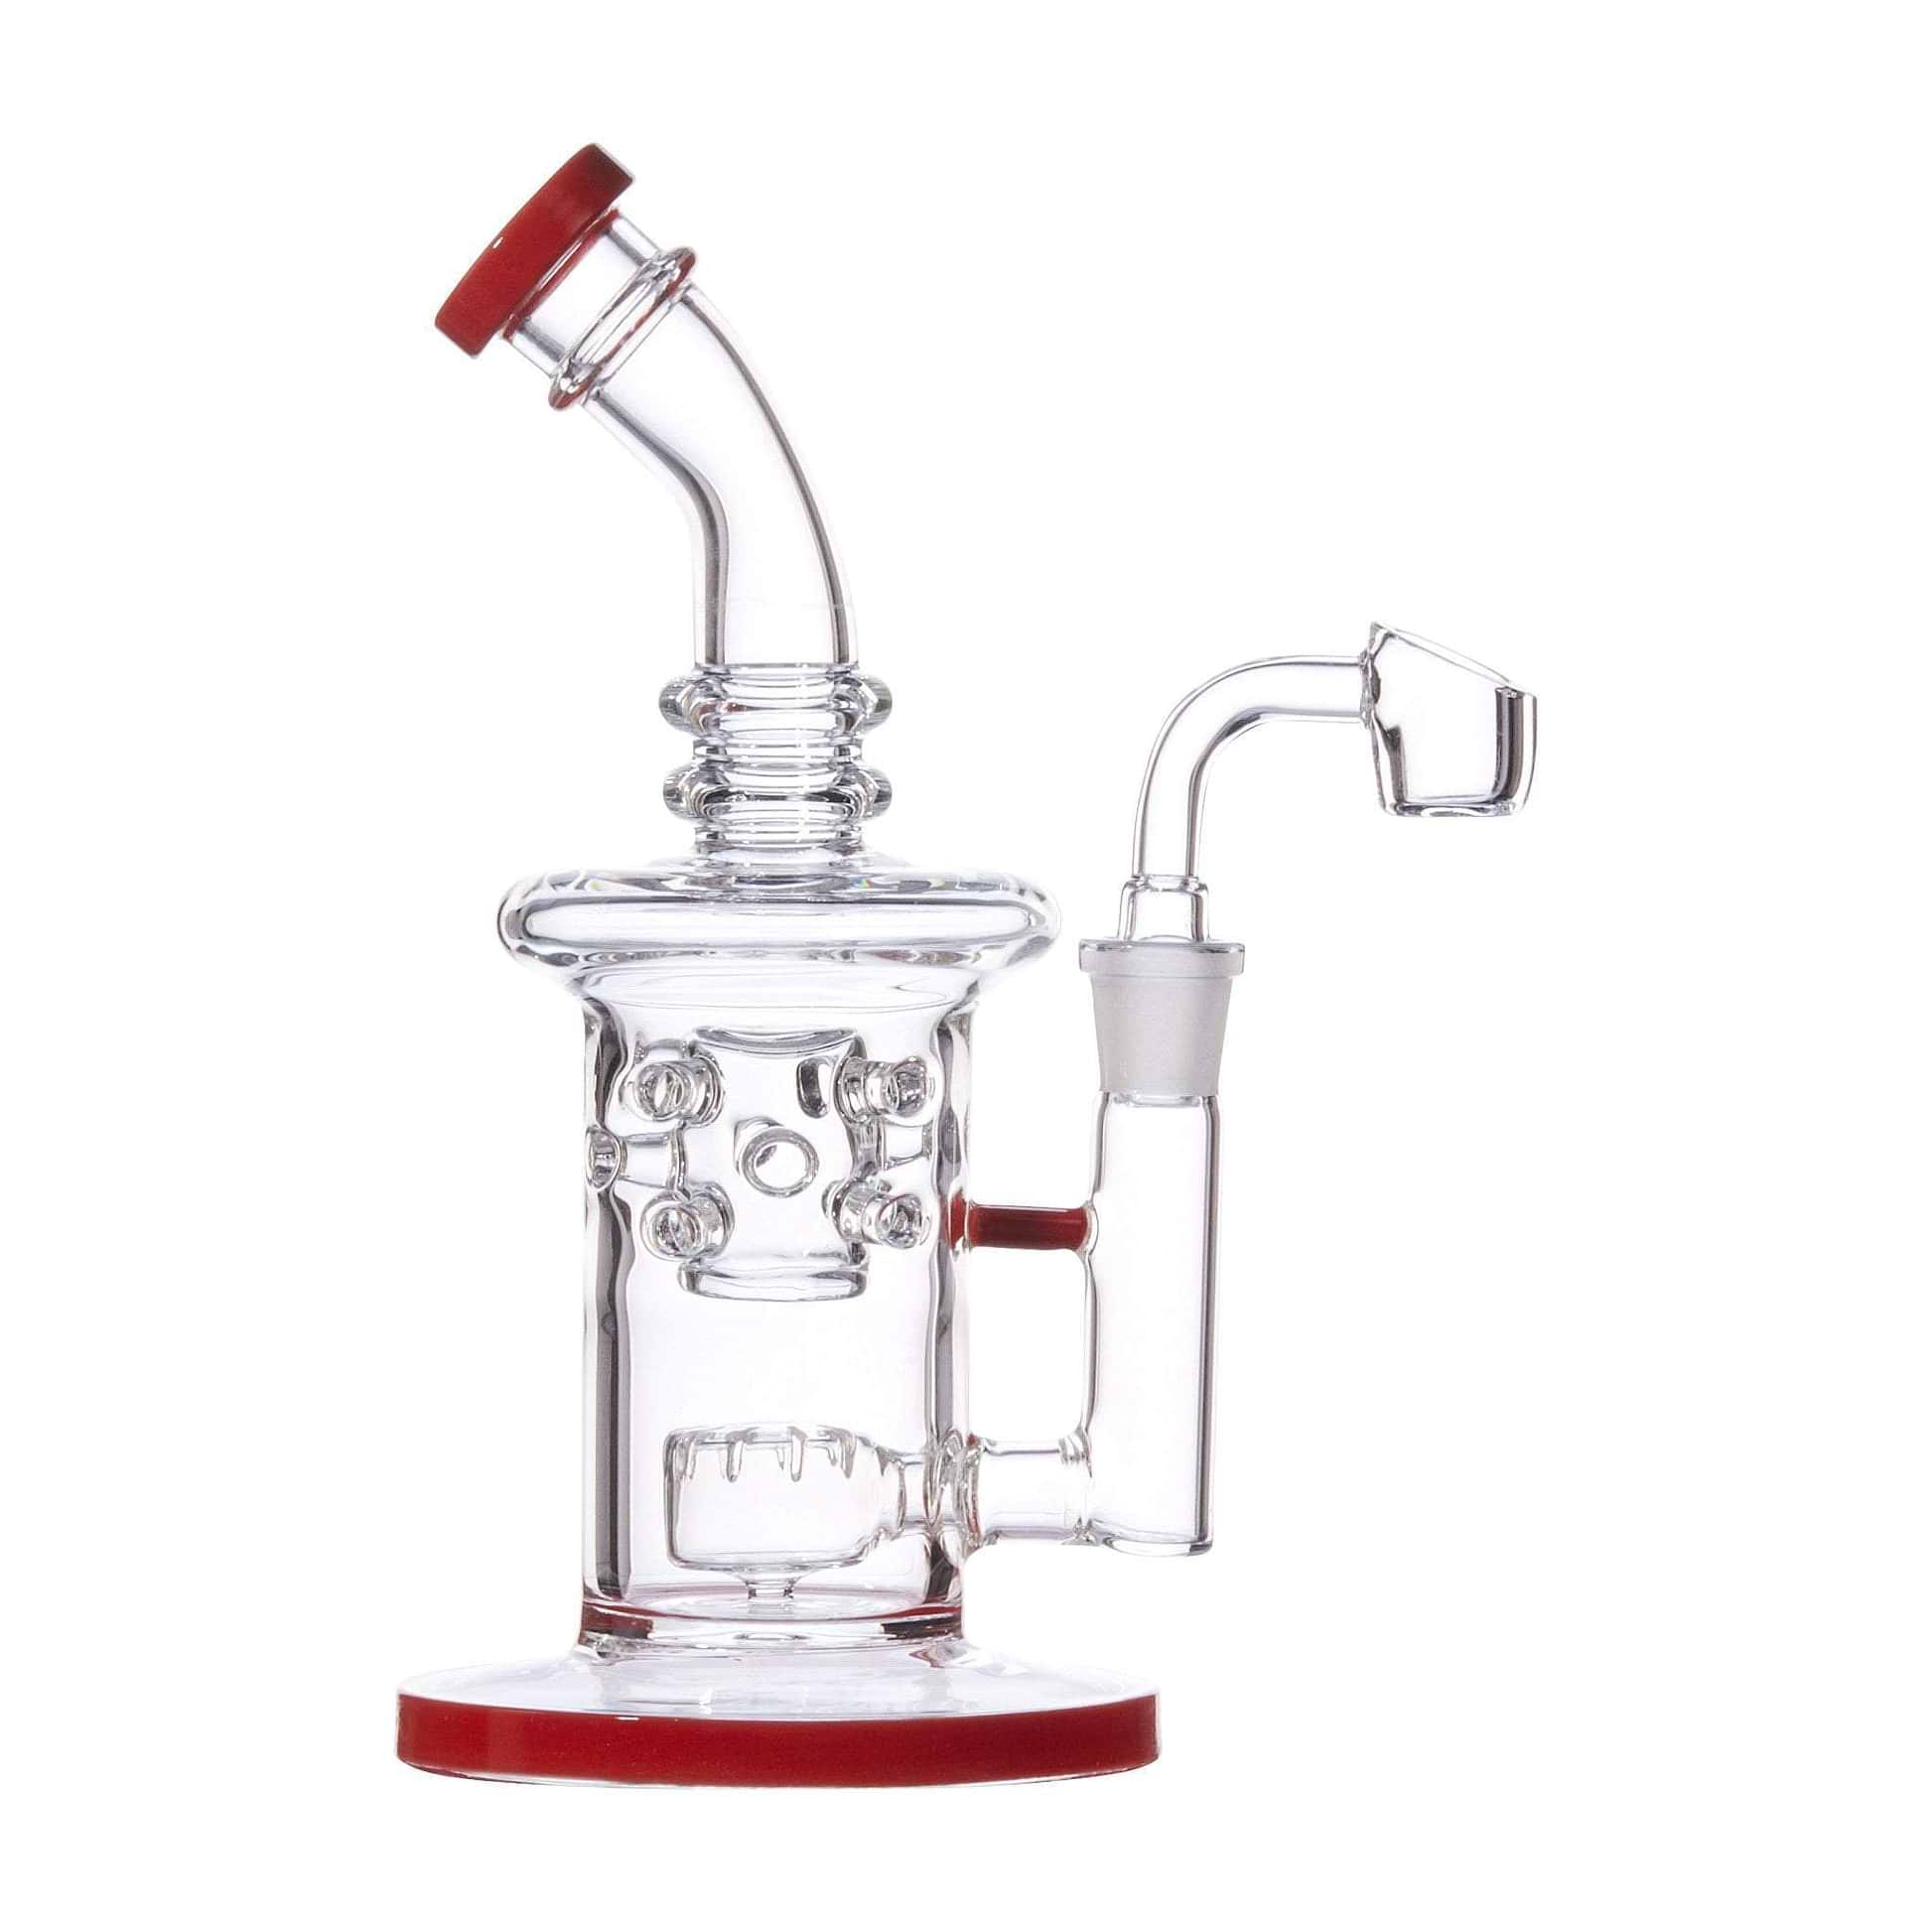 7.5-inch clear glass dab rig smoking device with inset and circ perc splashguard and scientific instrument look